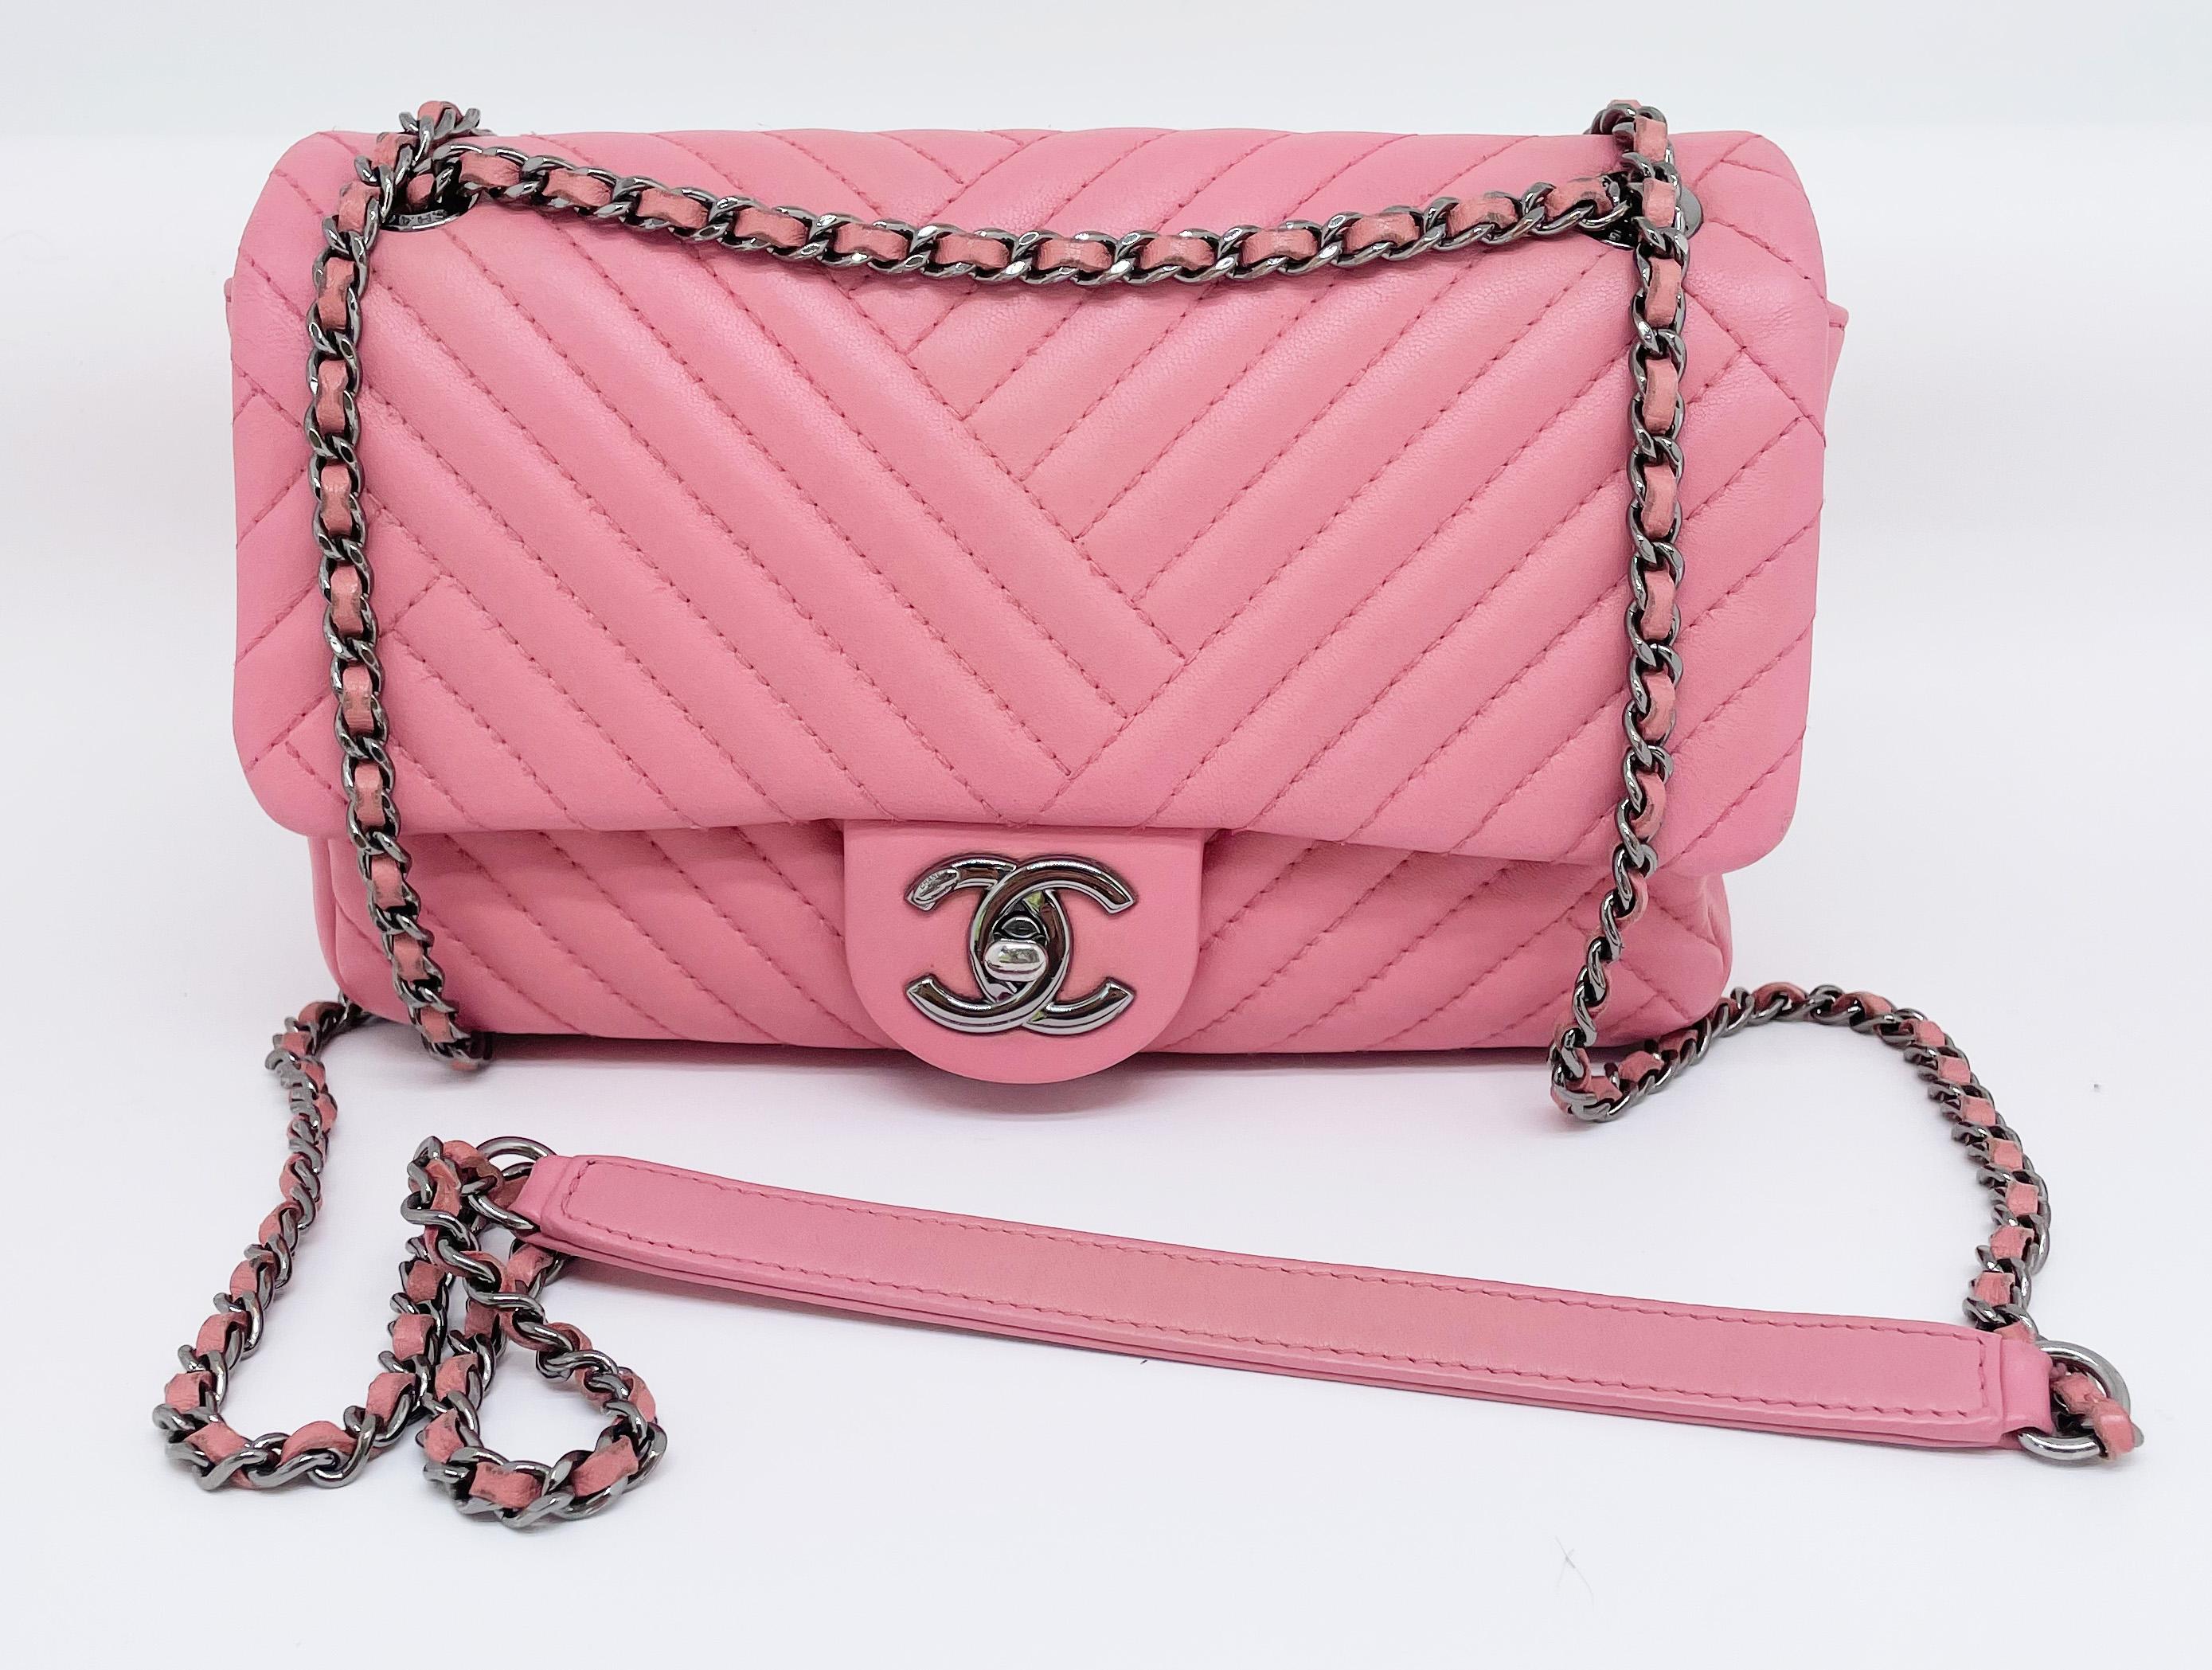 Super Chanel Timeless bag in lambskin with asymmetrical Chevron stitching patterns, barbie pink crumpled Chevron flap
Silver metal jewelry, Single flap opening
interwoven leather shoulder strap that can be worn double on the shoulder or single